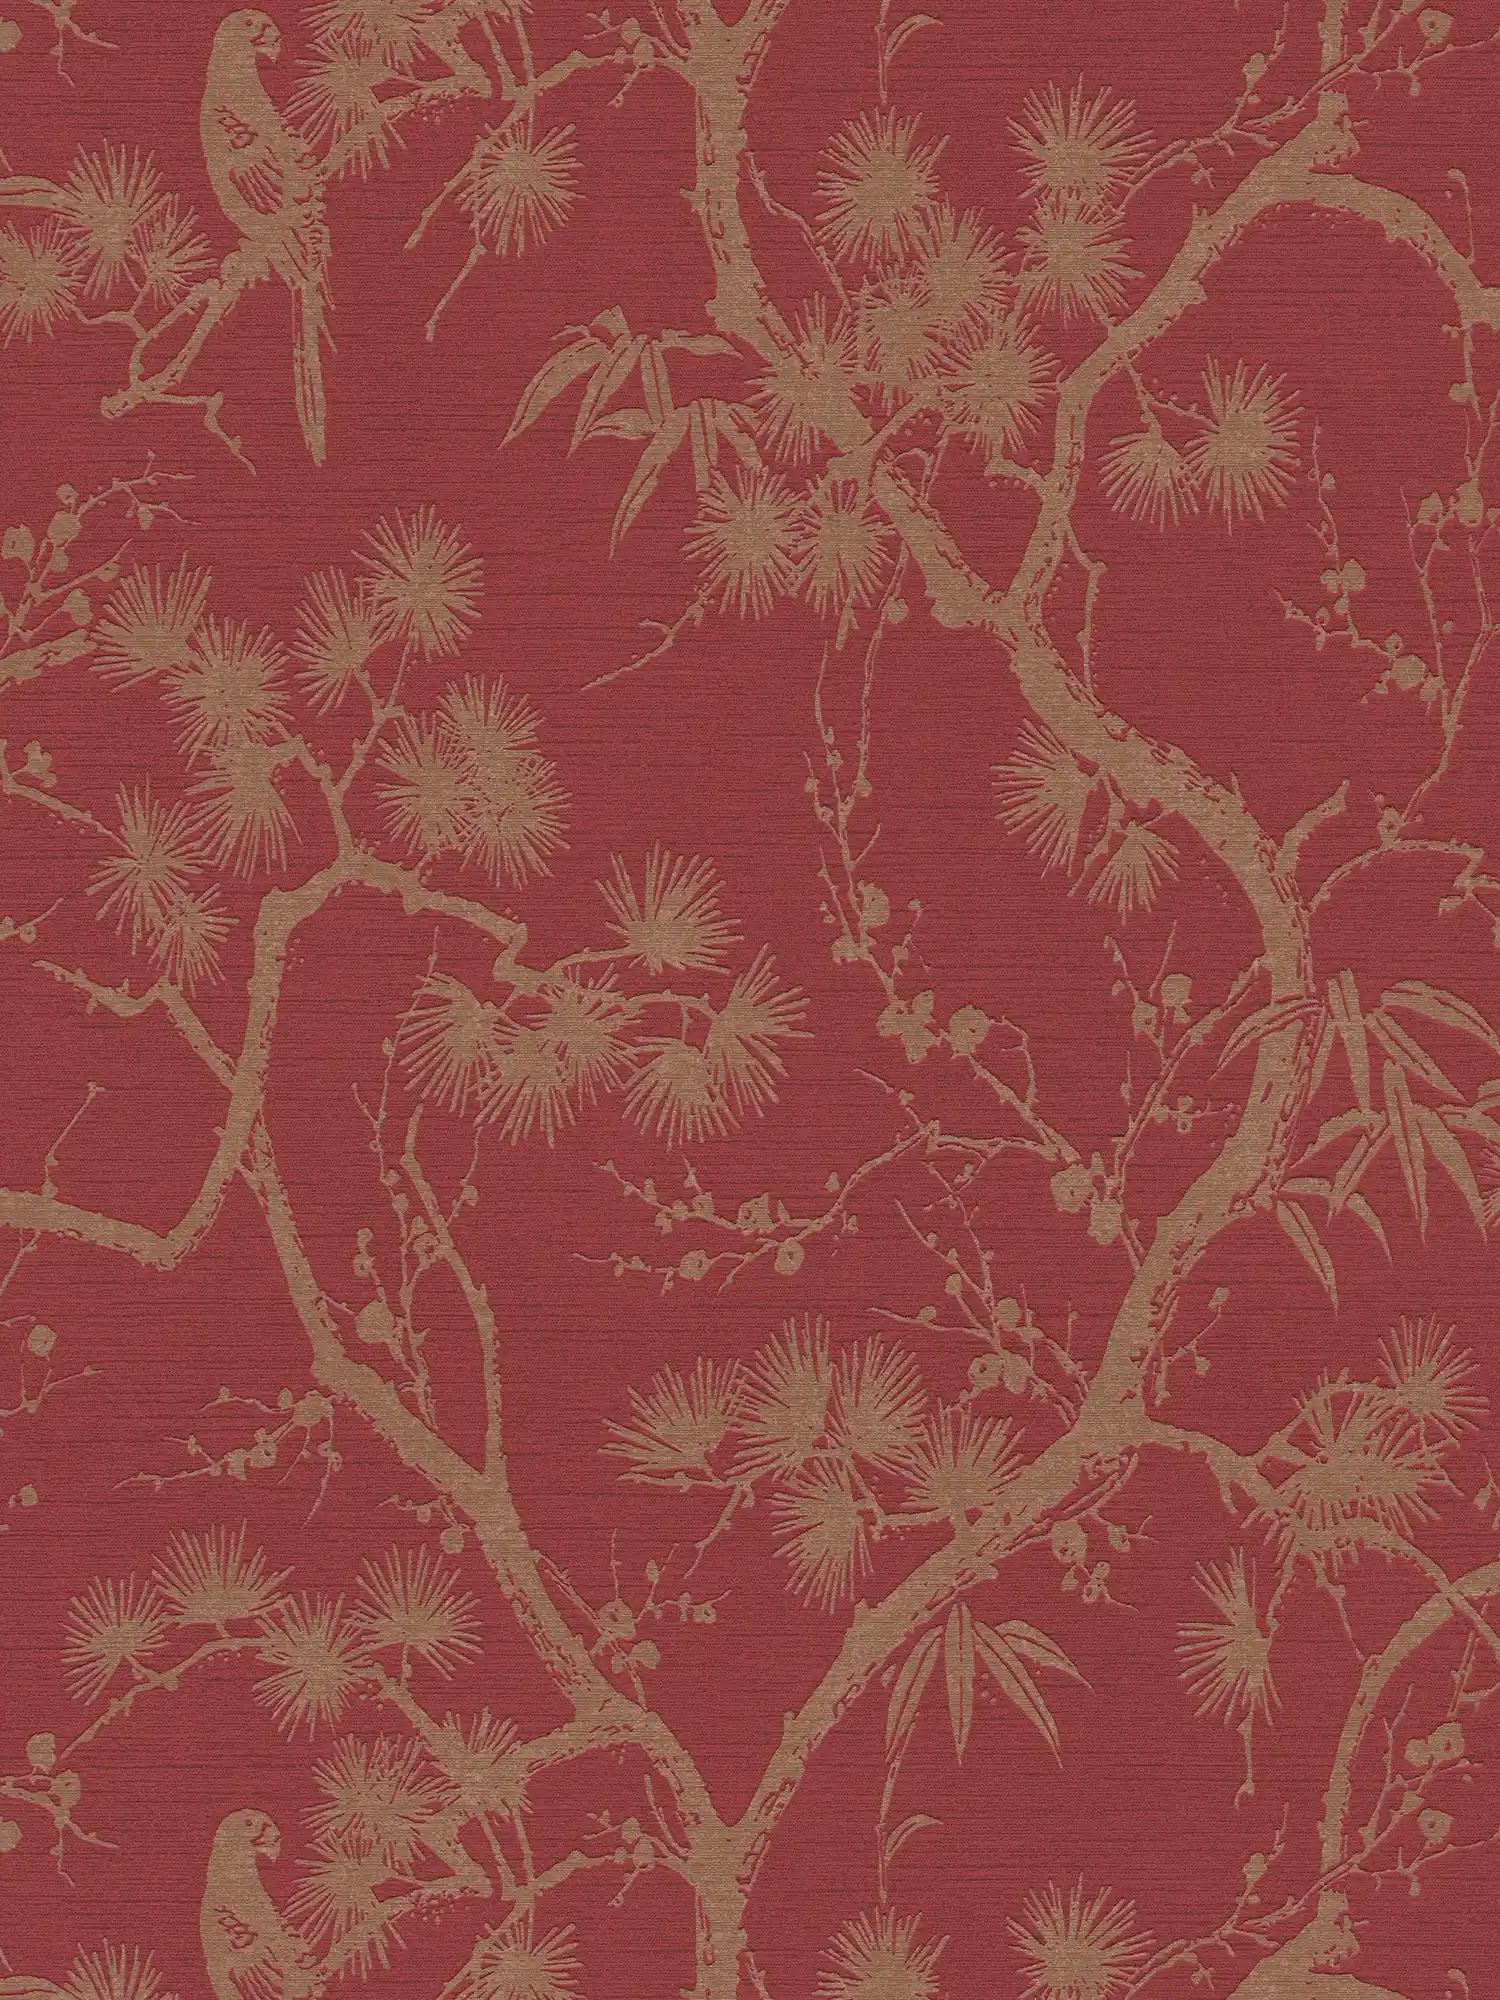         Non-woven wallpaper with natural design & gold pattern - metallic, red
    